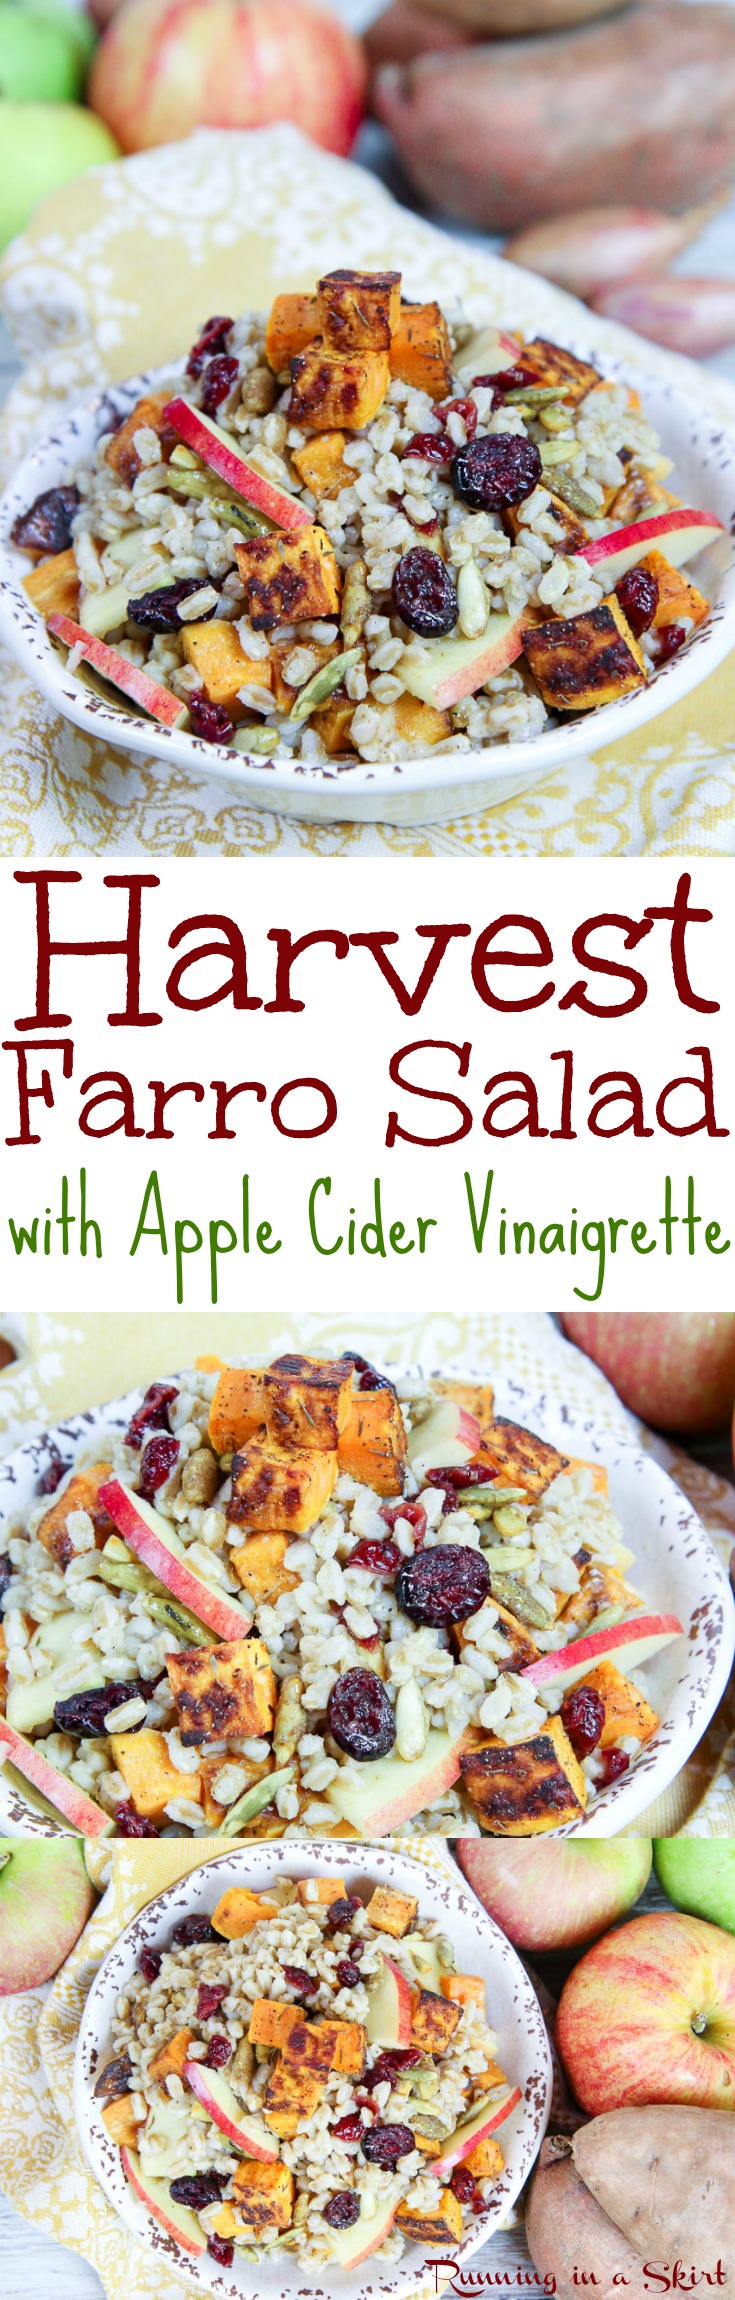 Harvest Farro Salad recipe with Apple Cider Vinaigrette. A healthy fall or winter dish. Perfect as a vegan Thanksgiving main dish or vegetarian side dish. Serve warm with roasted sweet potato, cranberry, apple and pumpkin seeds! Packed with veggies. Simple, easy and delicious. / Running in a Skirt via @juliewunder